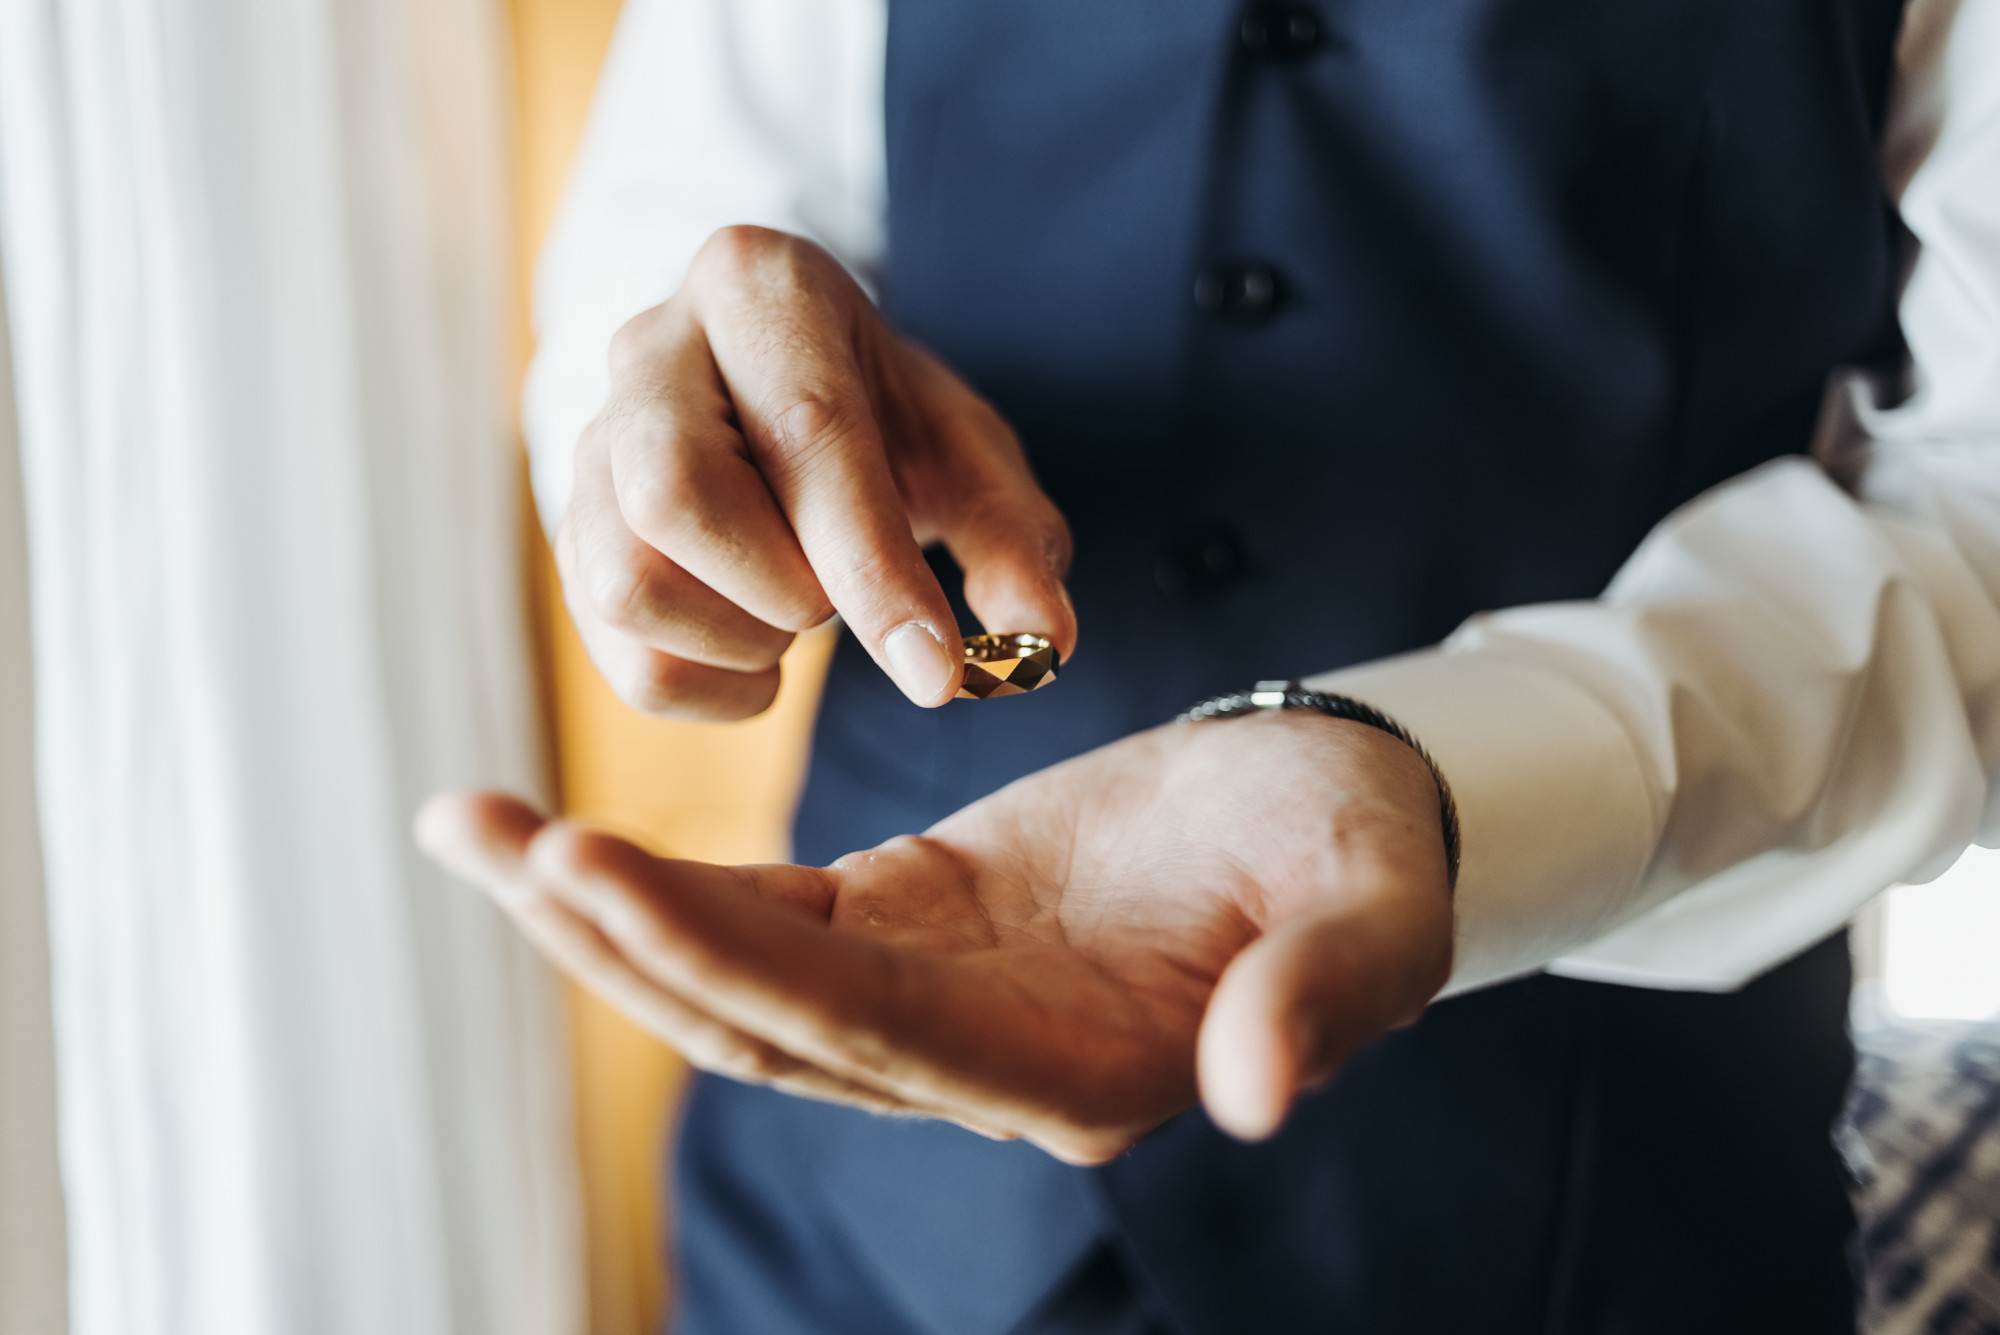 A man placing a ring on his hand | Source: Freepik